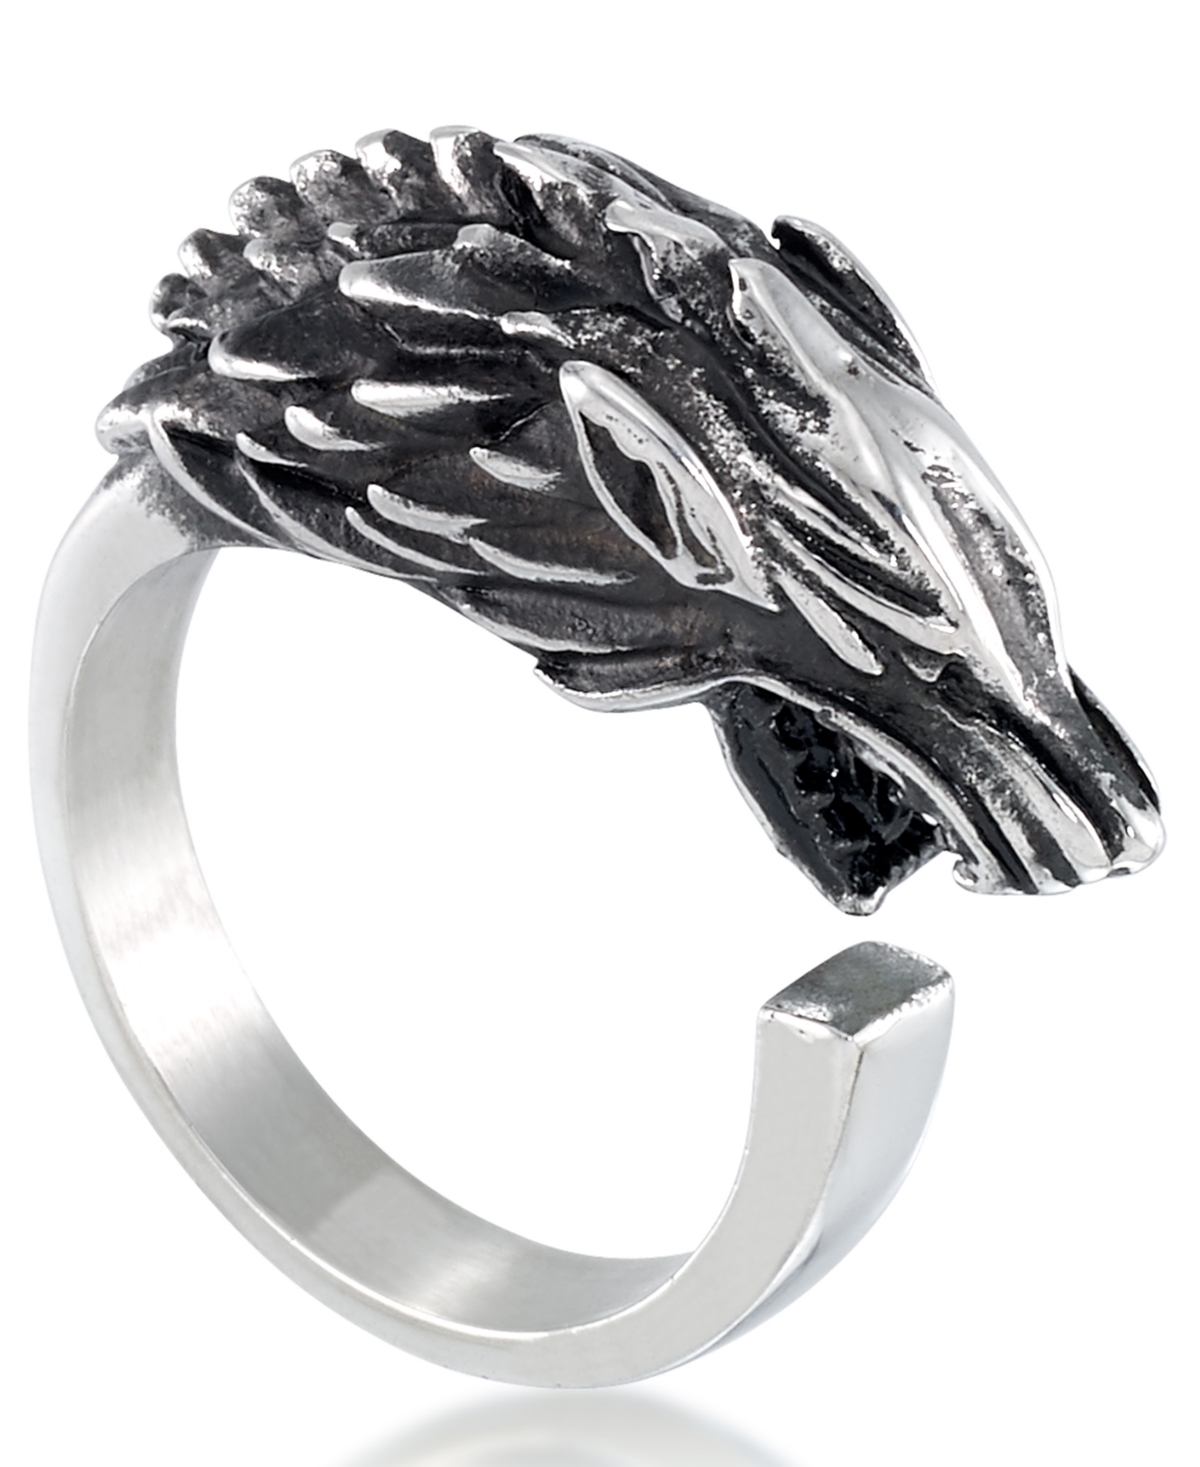 Men's Wolf Ring in Stainless Steel - Stainless Steel